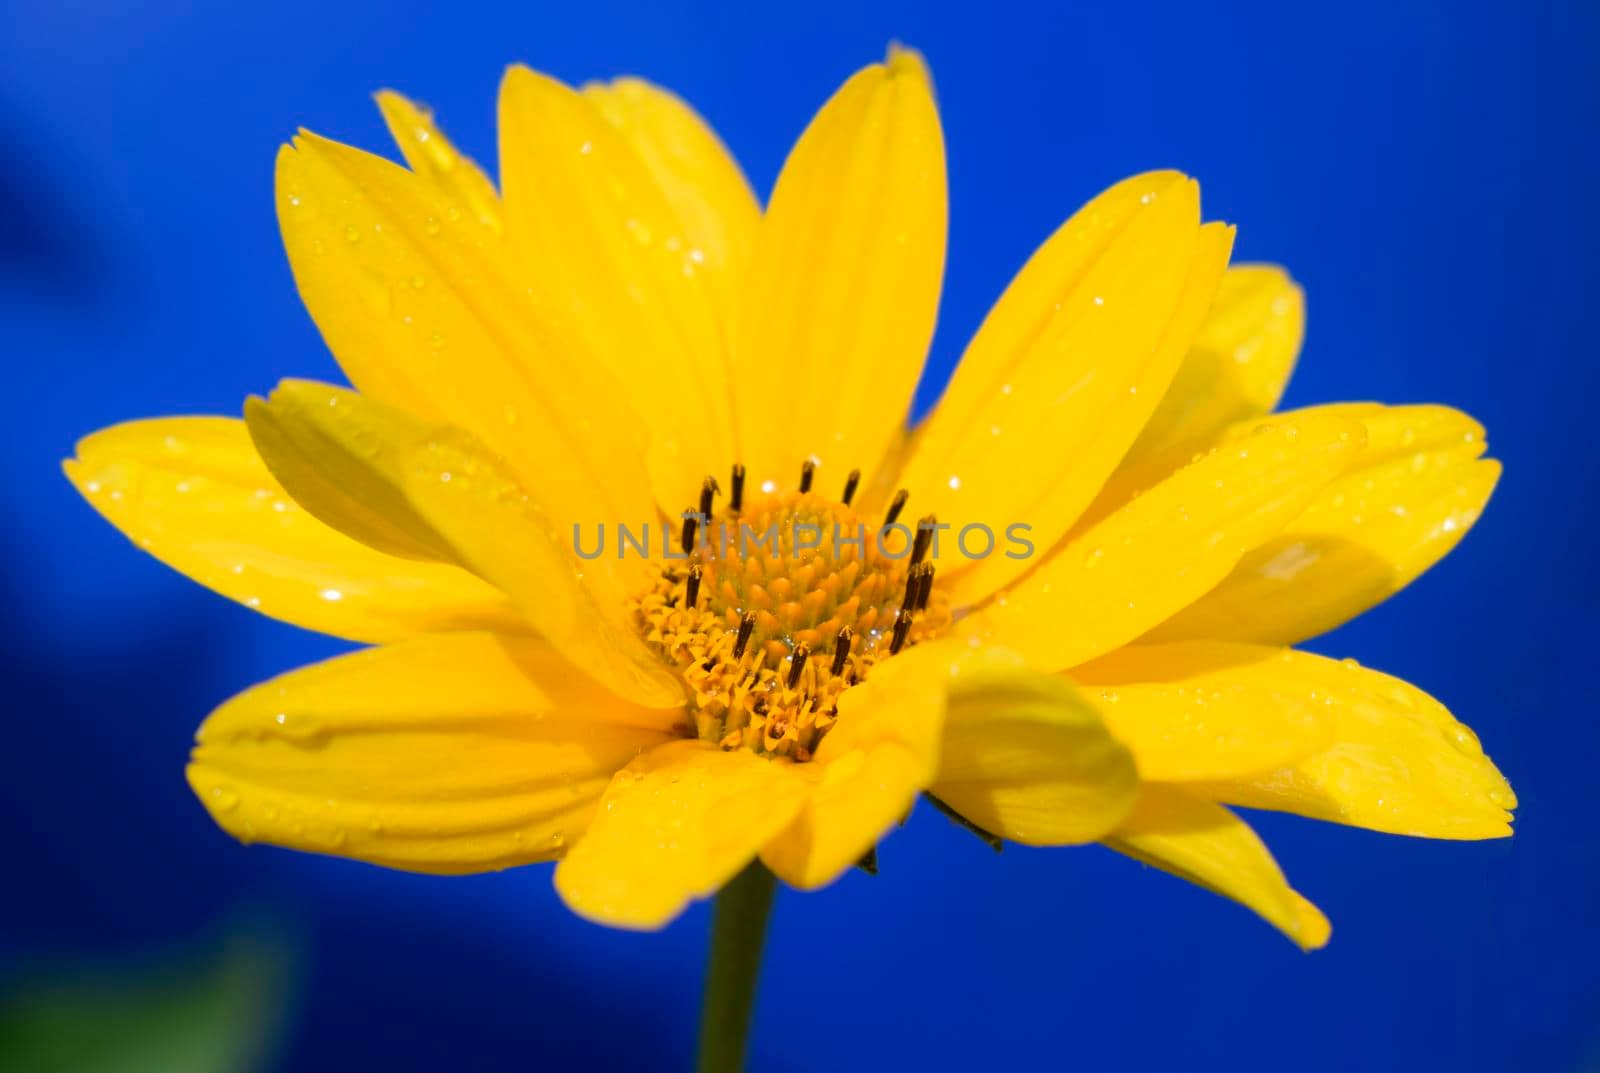 Yellow daisy flower (heliopsis) on the deep blue background. Beautiful flower petals with dew. Water drops on a flower